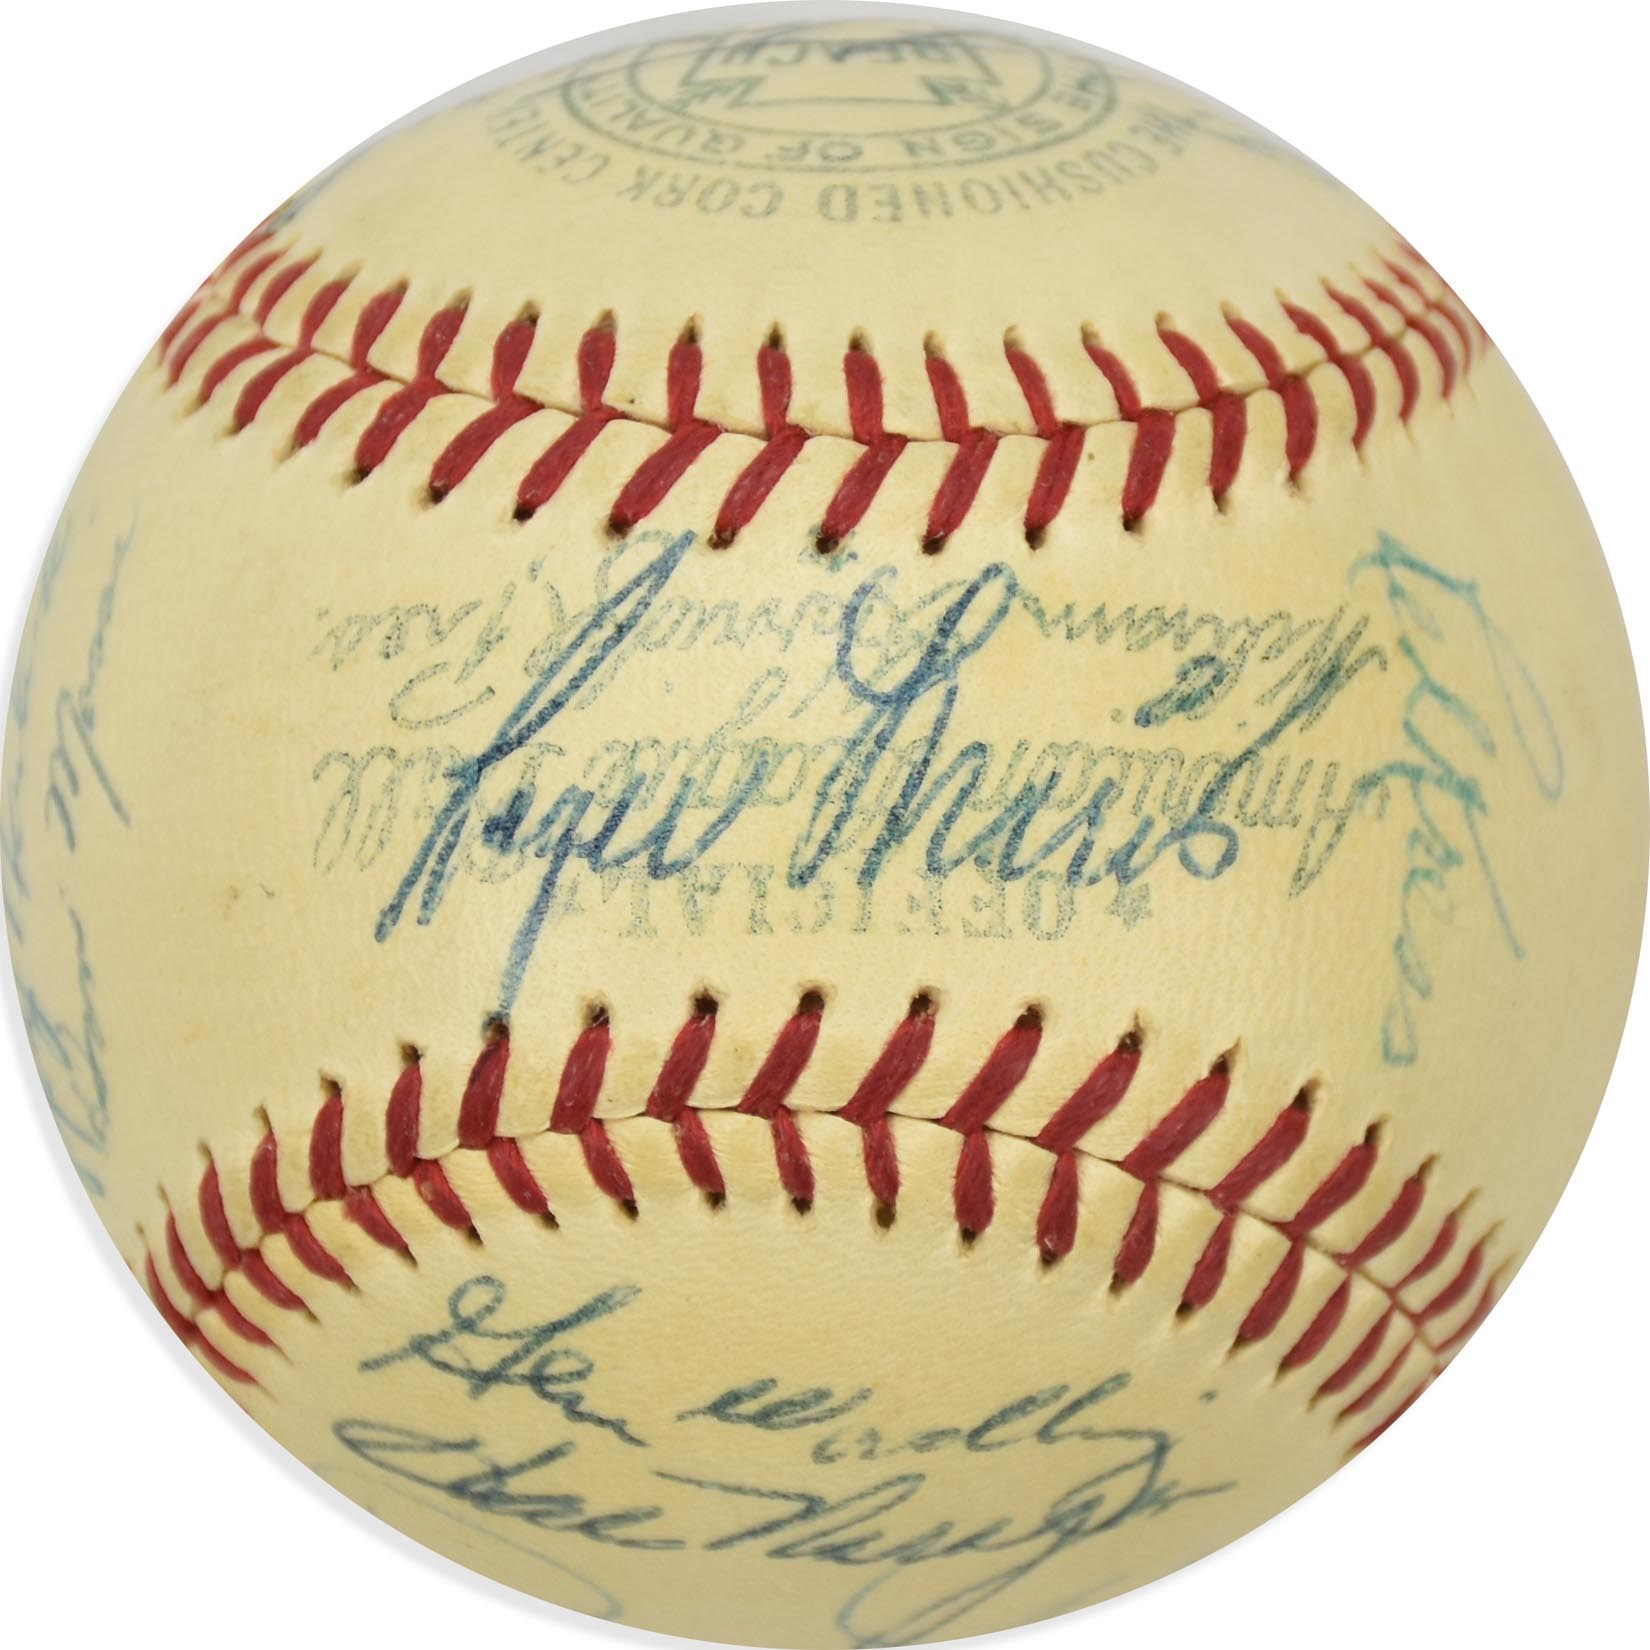 - 1957 Cleveland Indians Team-Signed Baseball with Rookie Roger Maris